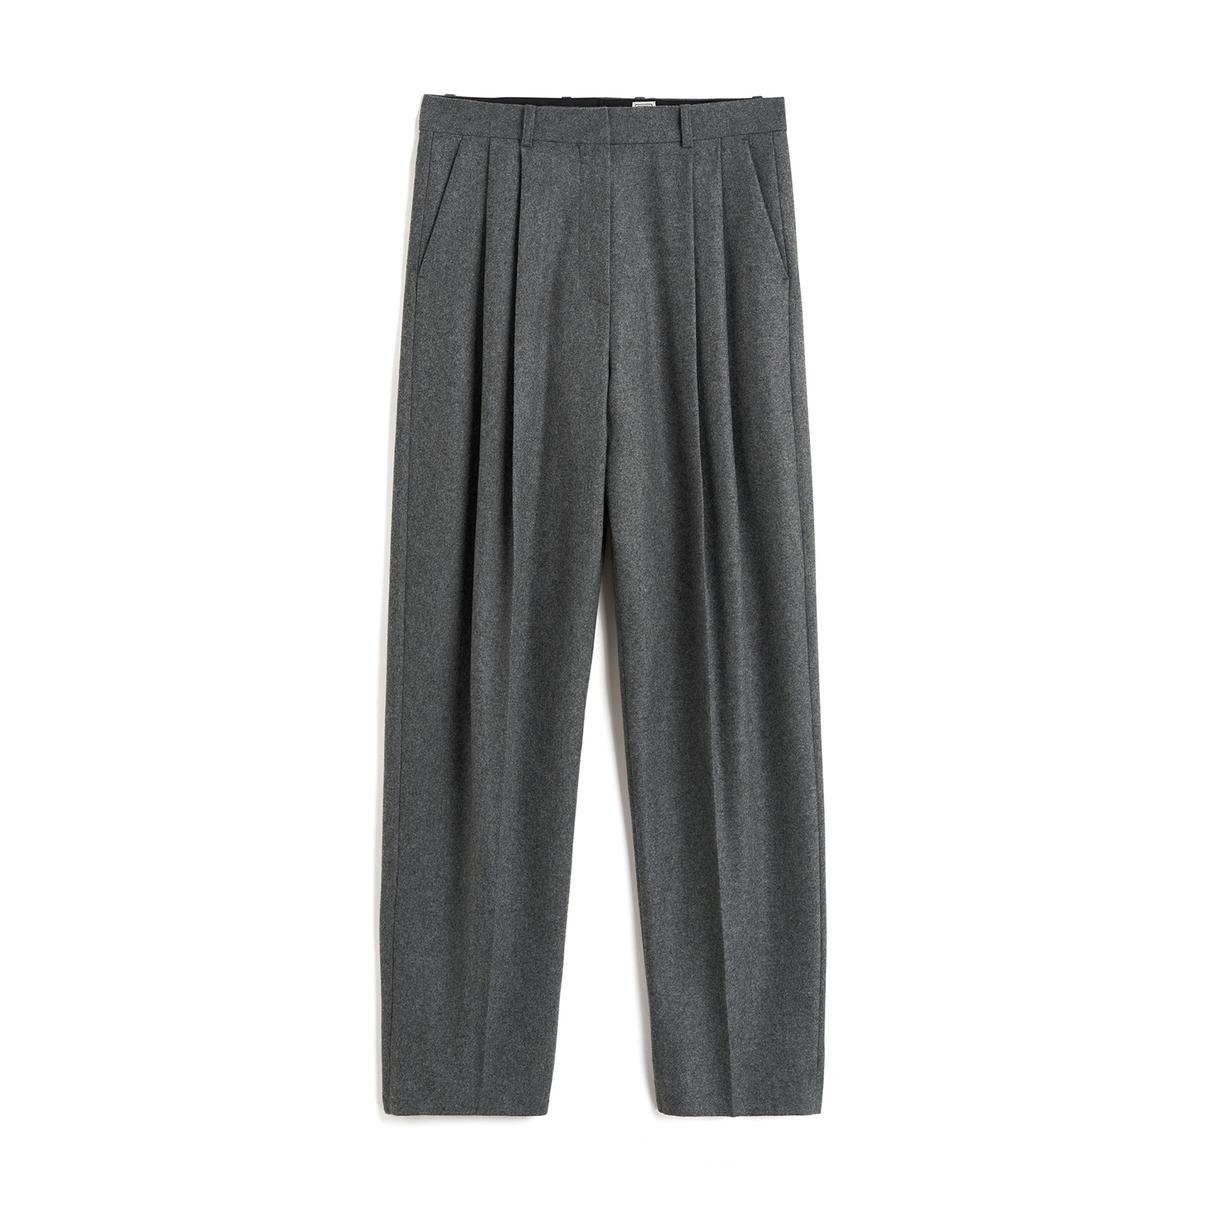 Toteme Double-Pleated Tailored Trousers